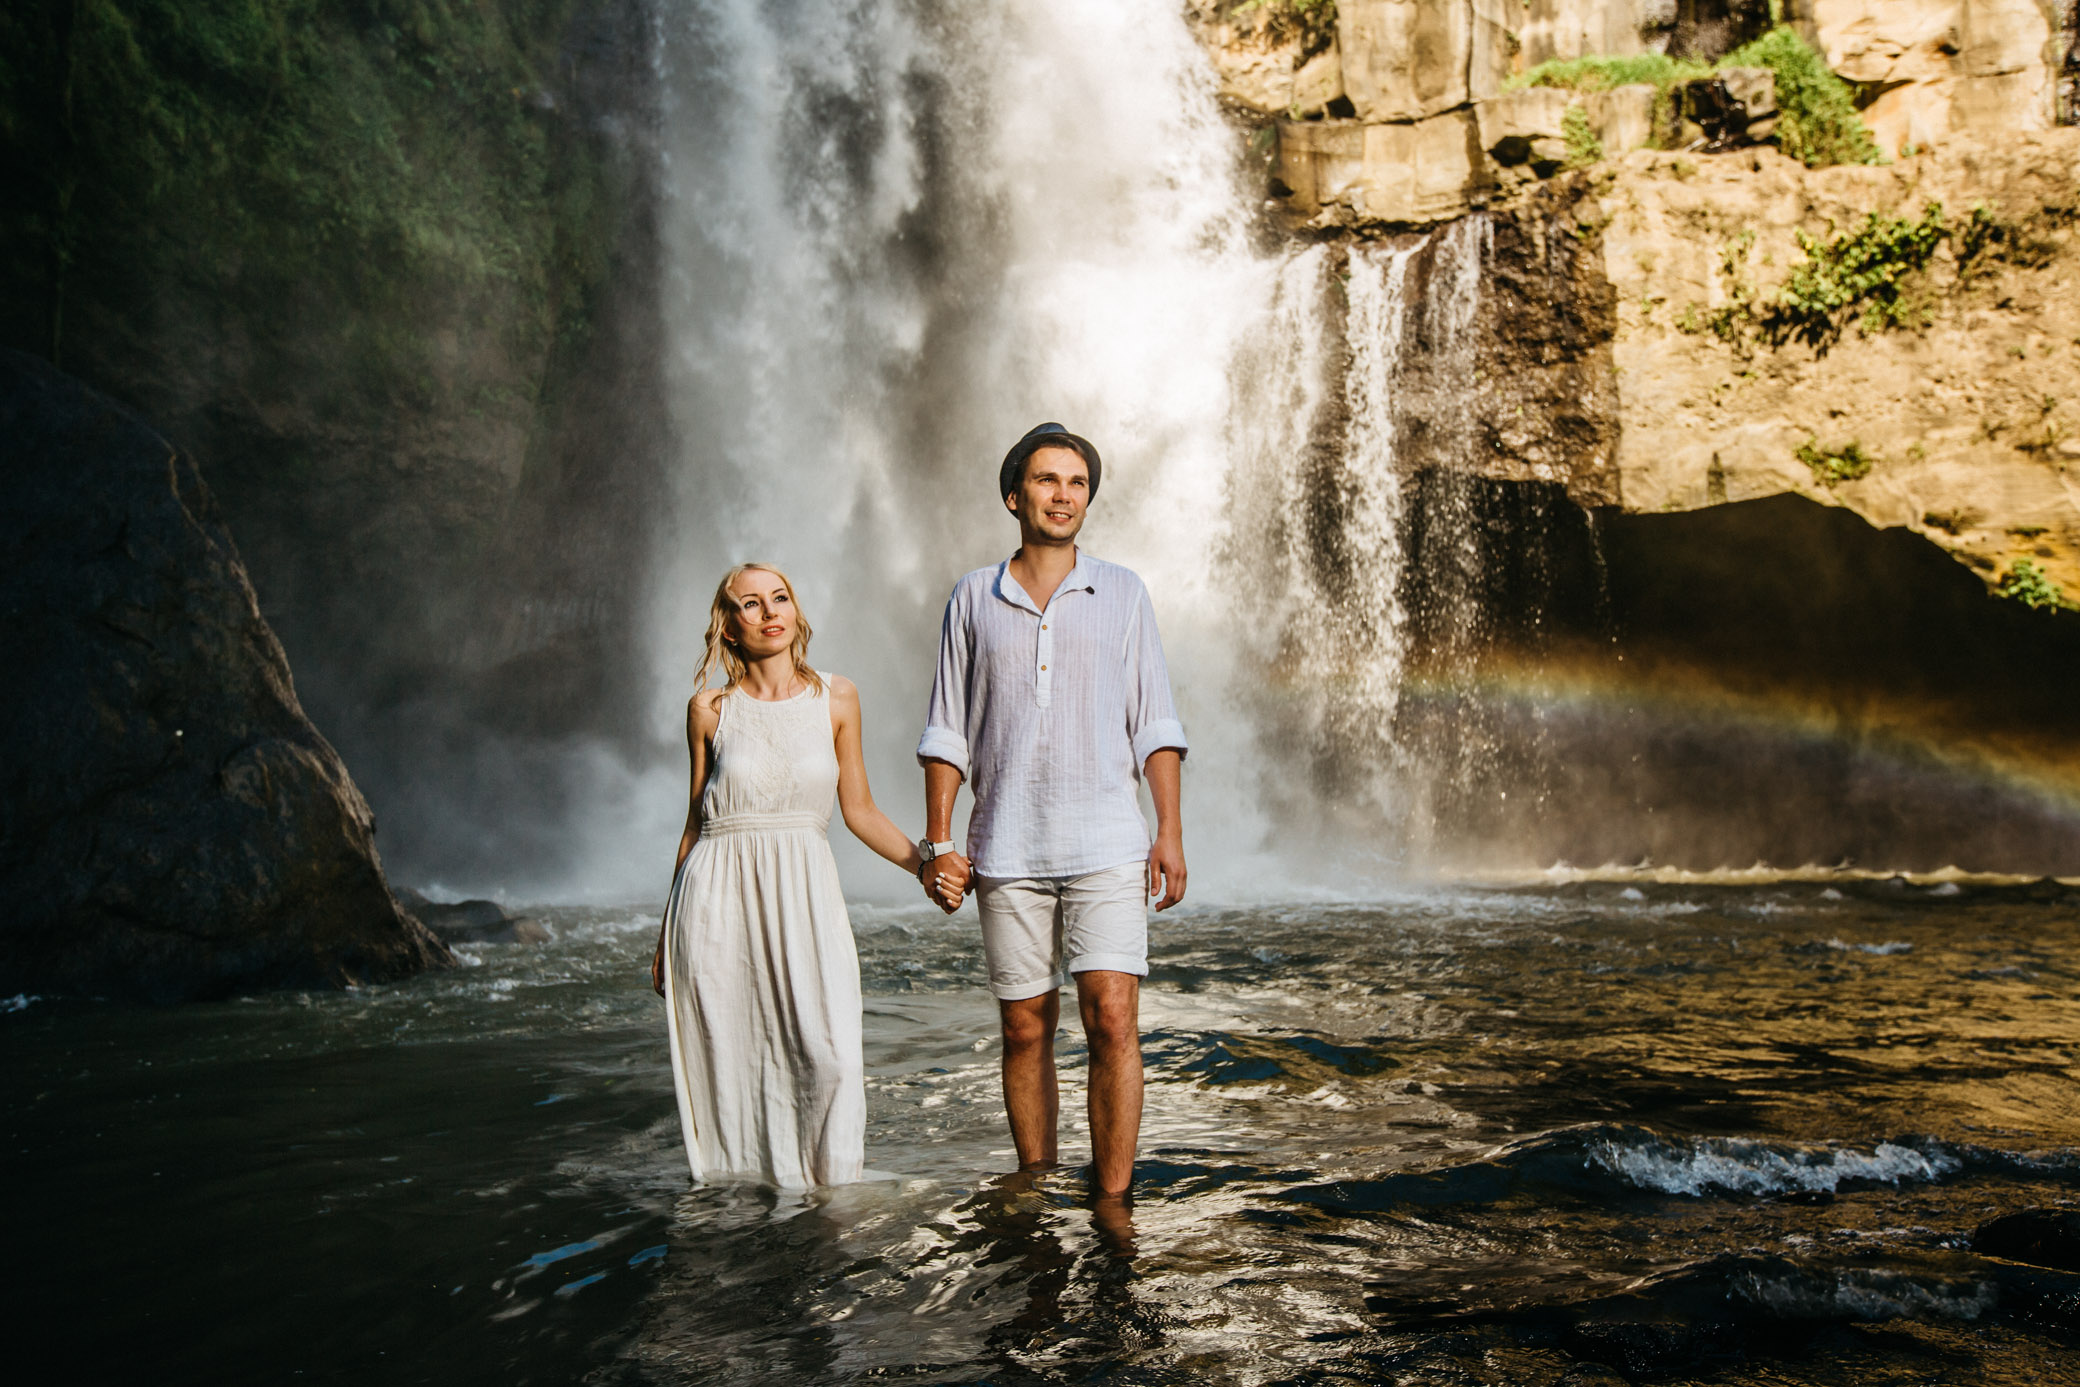 
Photosession at the Tegenungan waterfall, Bali island. The guys are holding hands, watching the distance. A guy in a hat, a girl in a white summer dress with wet hair